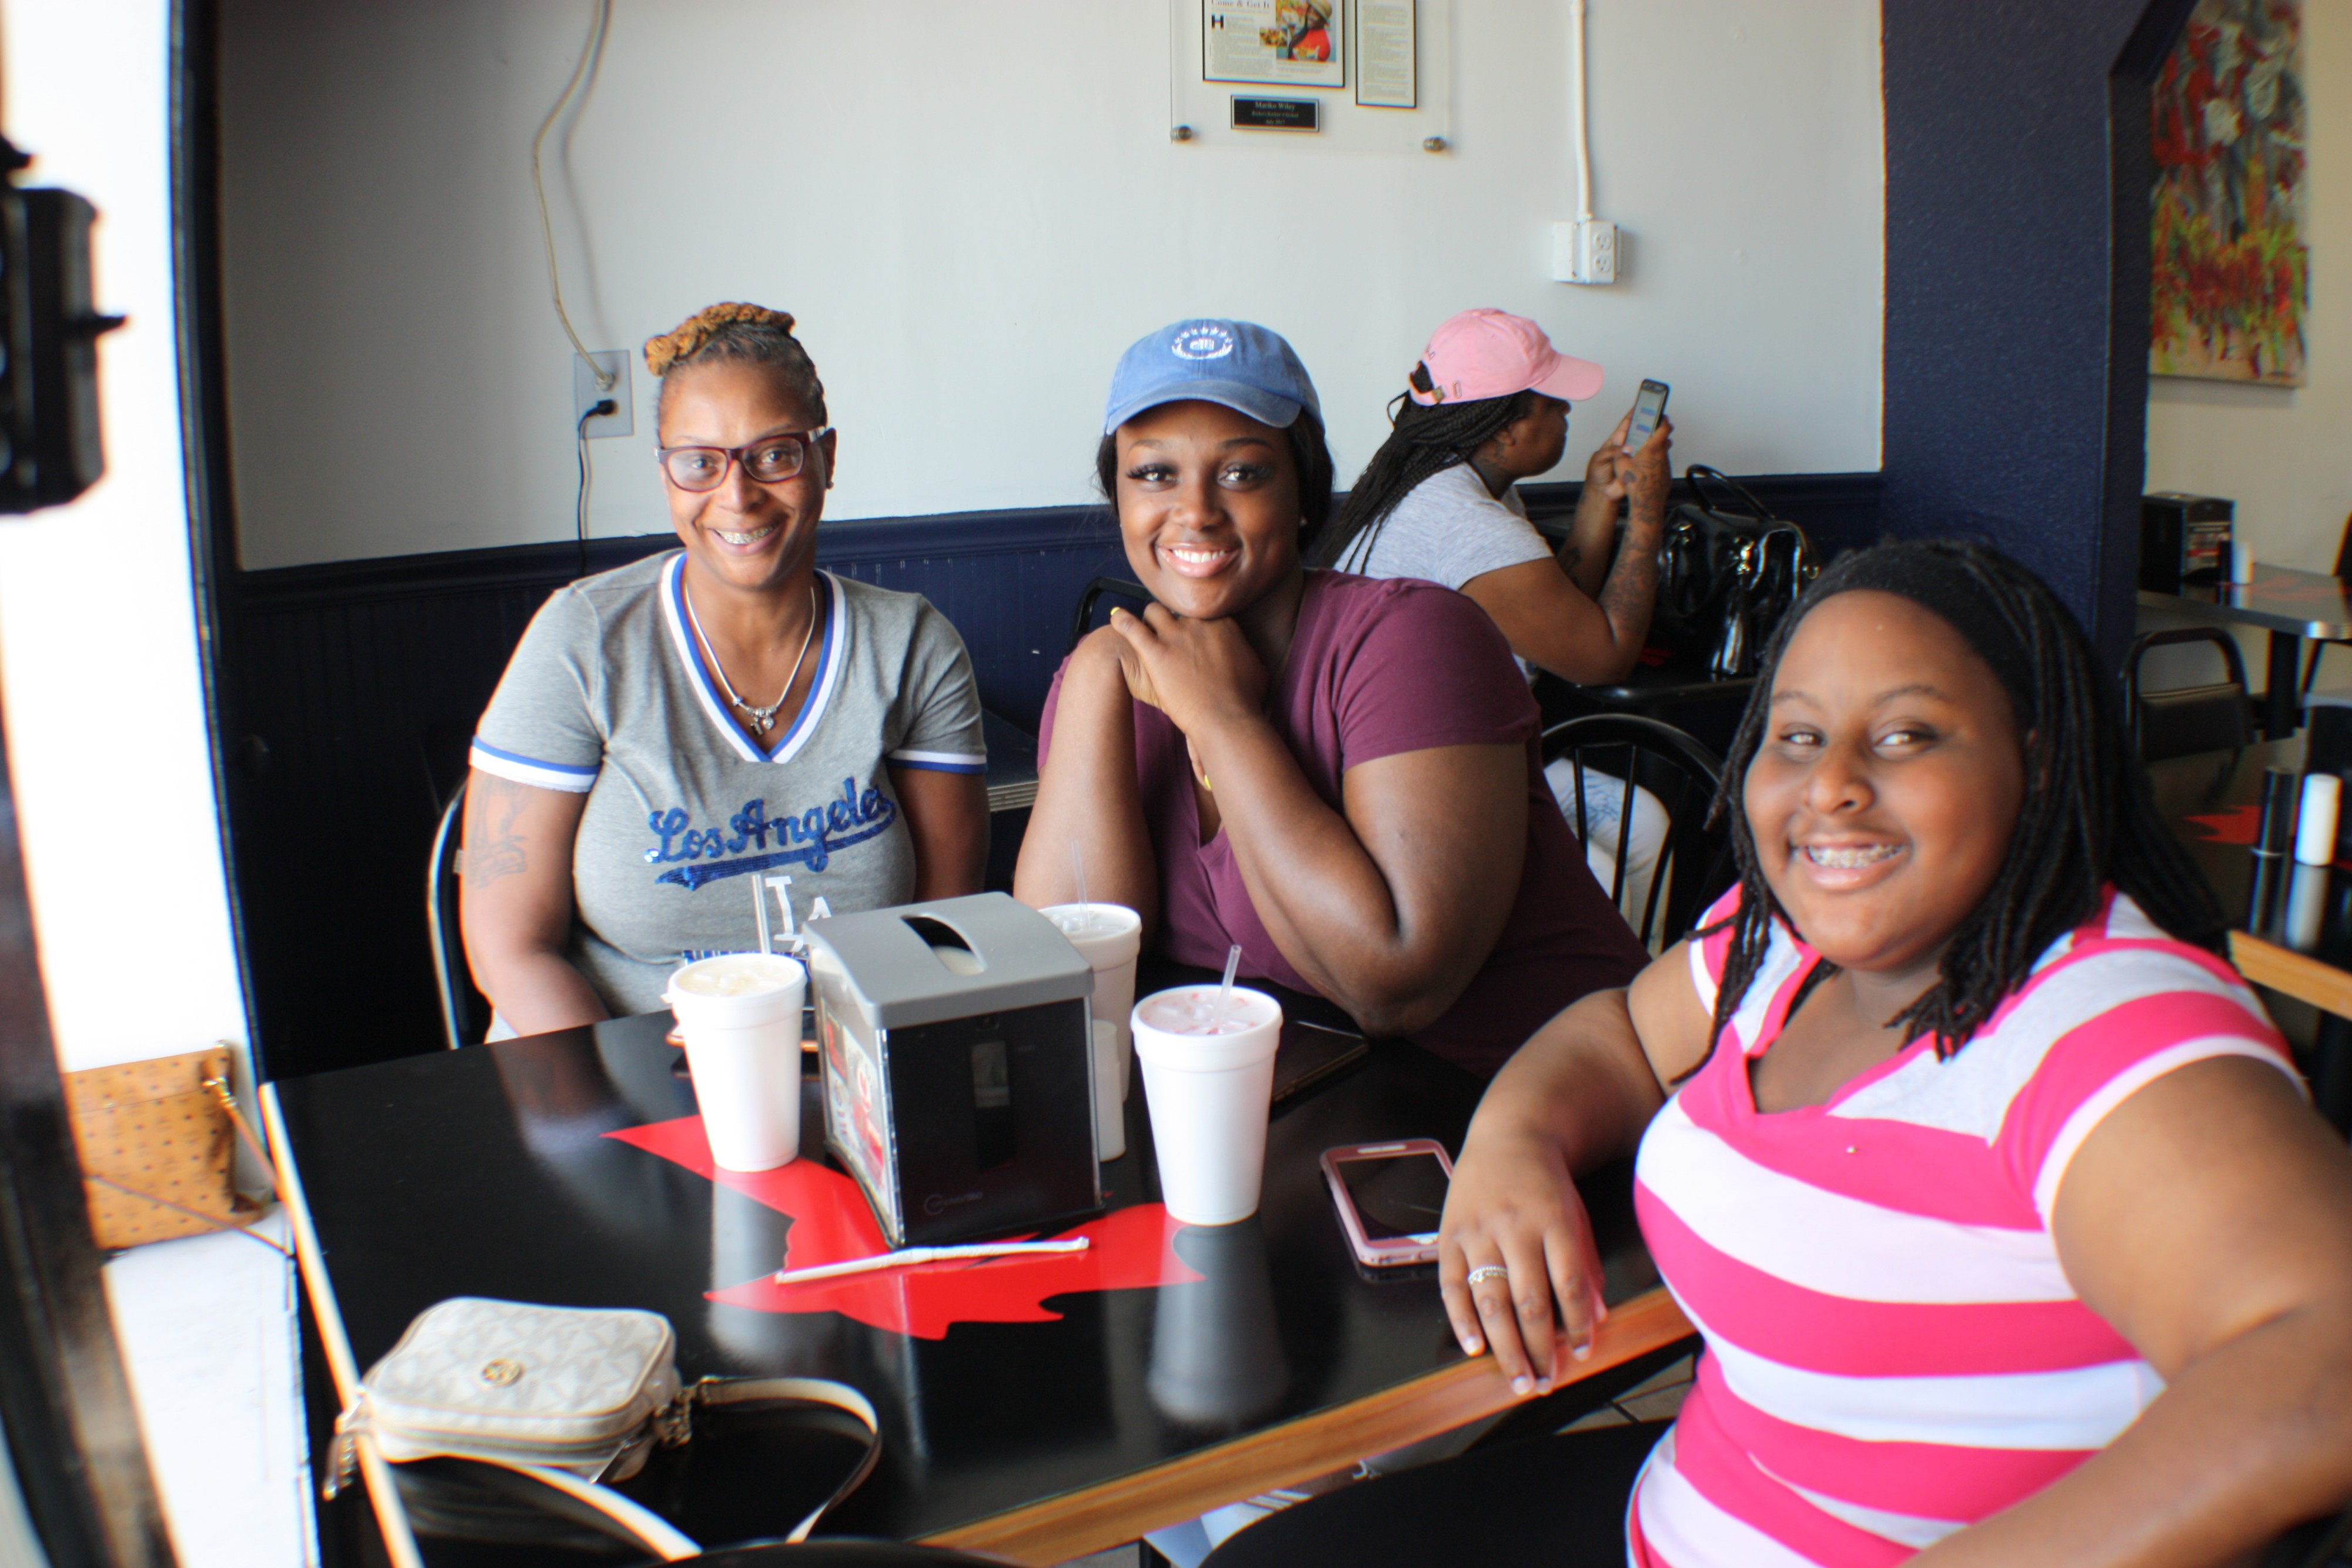 Felecia Rucker (L) brought her daughters to Riko's to try the food and says it's their new go-to spot for chicken. (Cole Bradley)